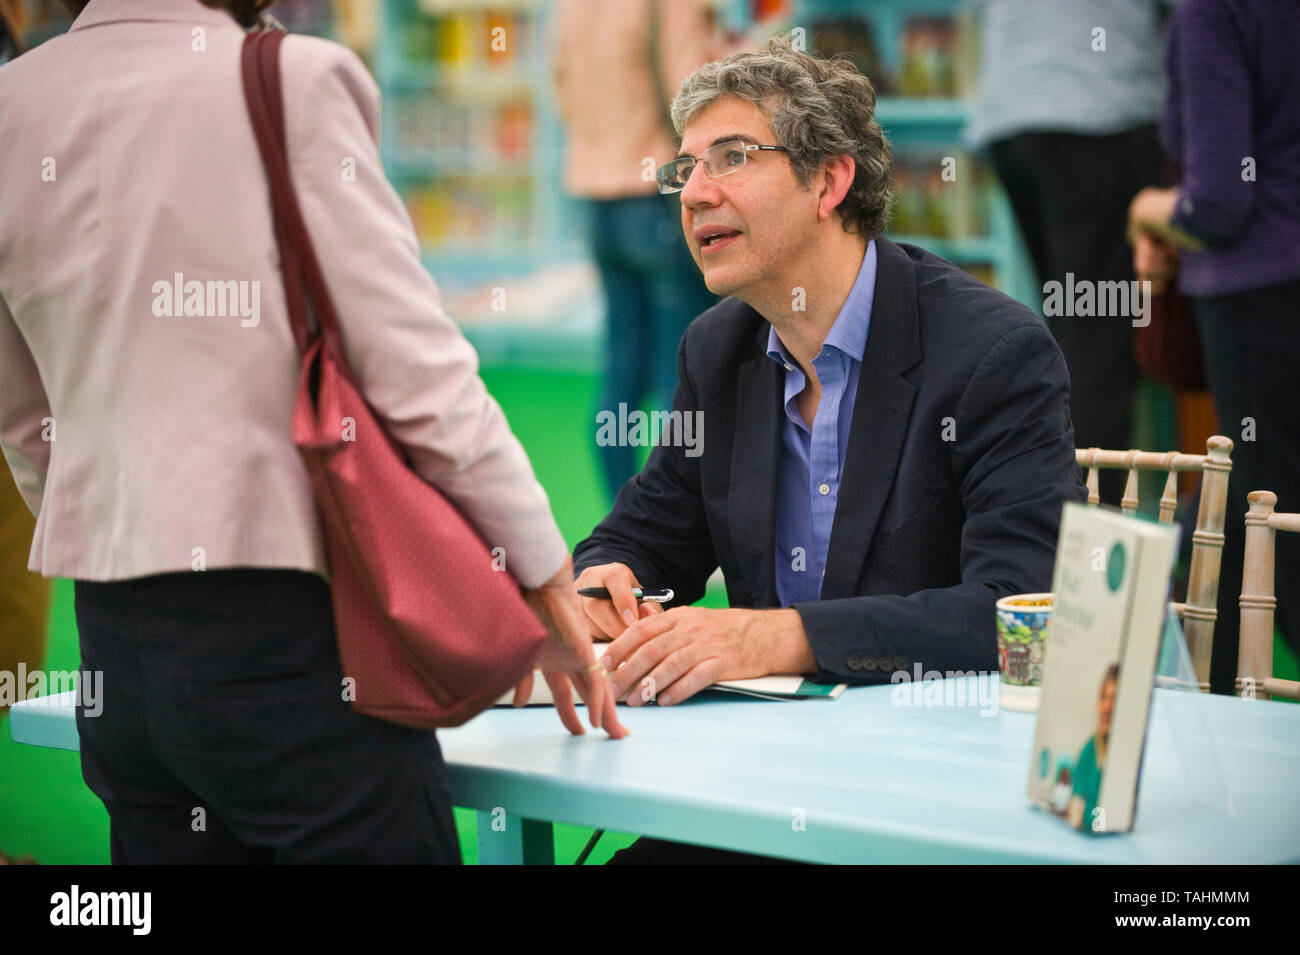 David Nott Welsh born consultant surgeon book signing at Hay Festival Hay-on-Wye Powys Wales UK Stock Photo